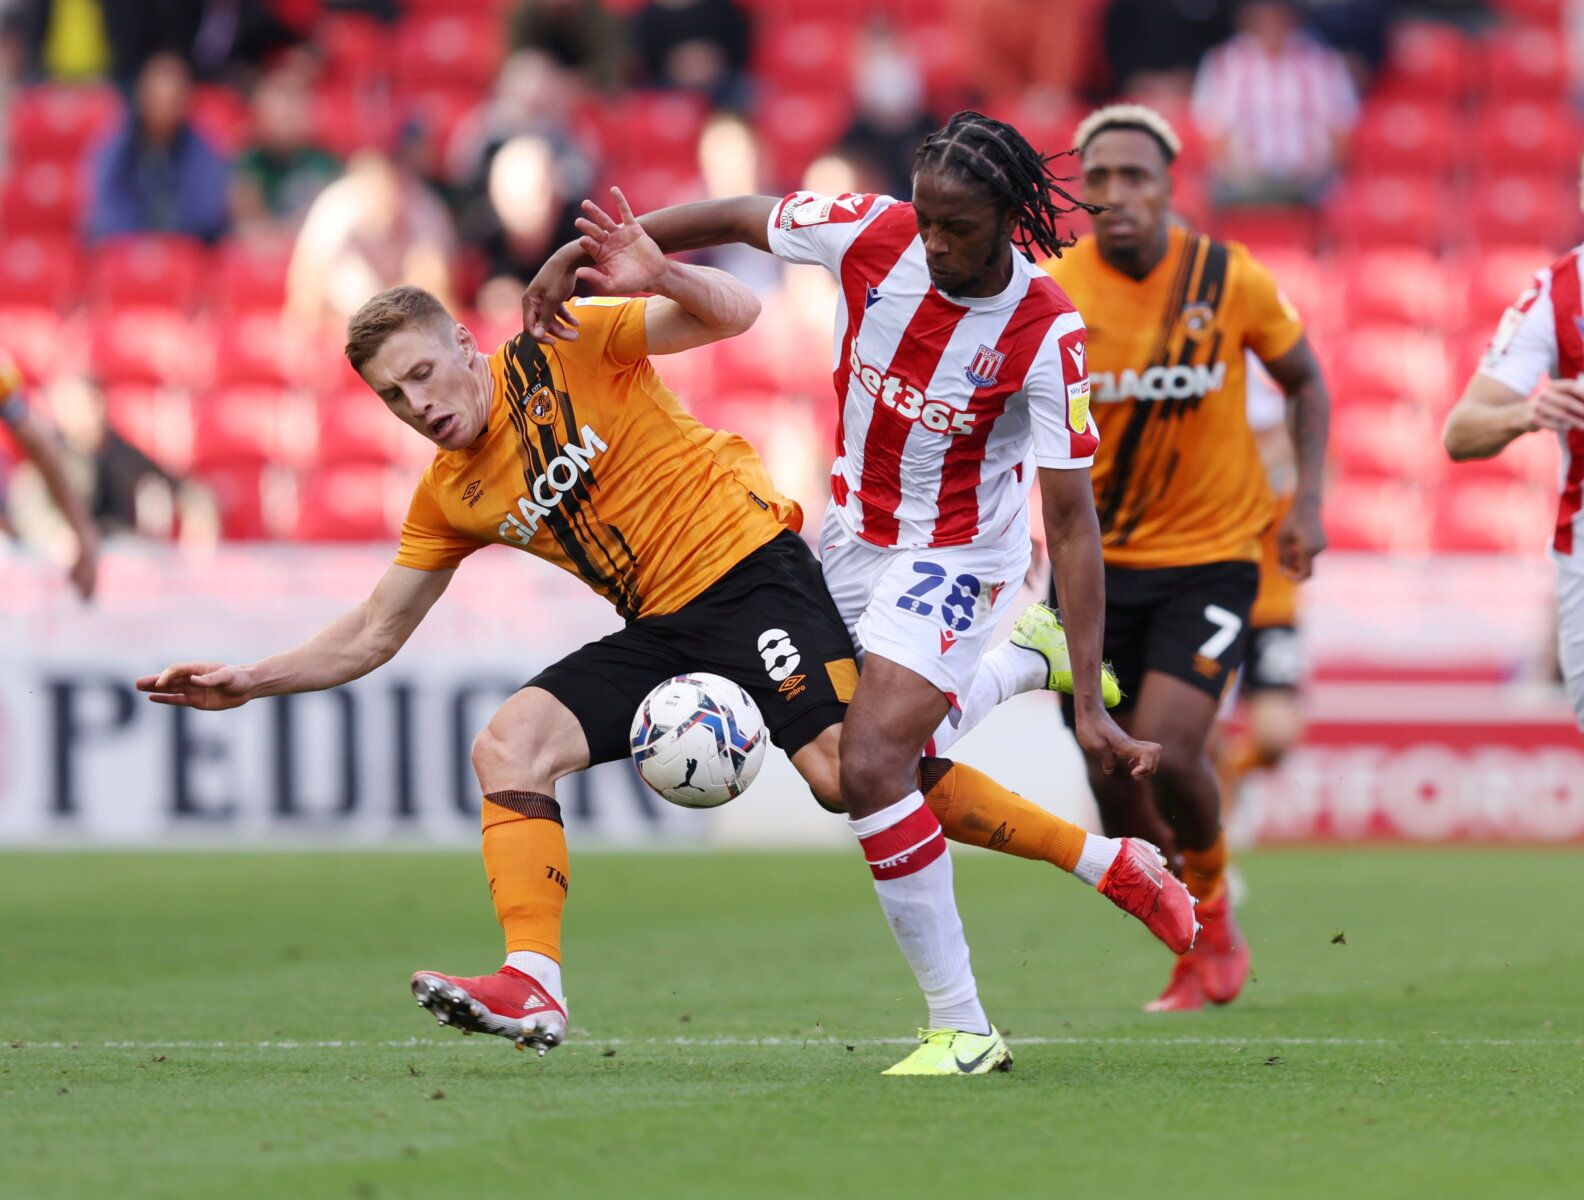 Soccer Football - England - Championship - Stoke City v Hull City - bet365 Stadium, Stoke-on-Trent, Britain - September 25, 2021  Hull City's Greg Docherty in action with Stoke City's Romaine Sawyers  Action Images/John Clifton   EDITORIAL USE ONLY. No use with unauthorized audio, video, data, fixture lists, club/league logos or 